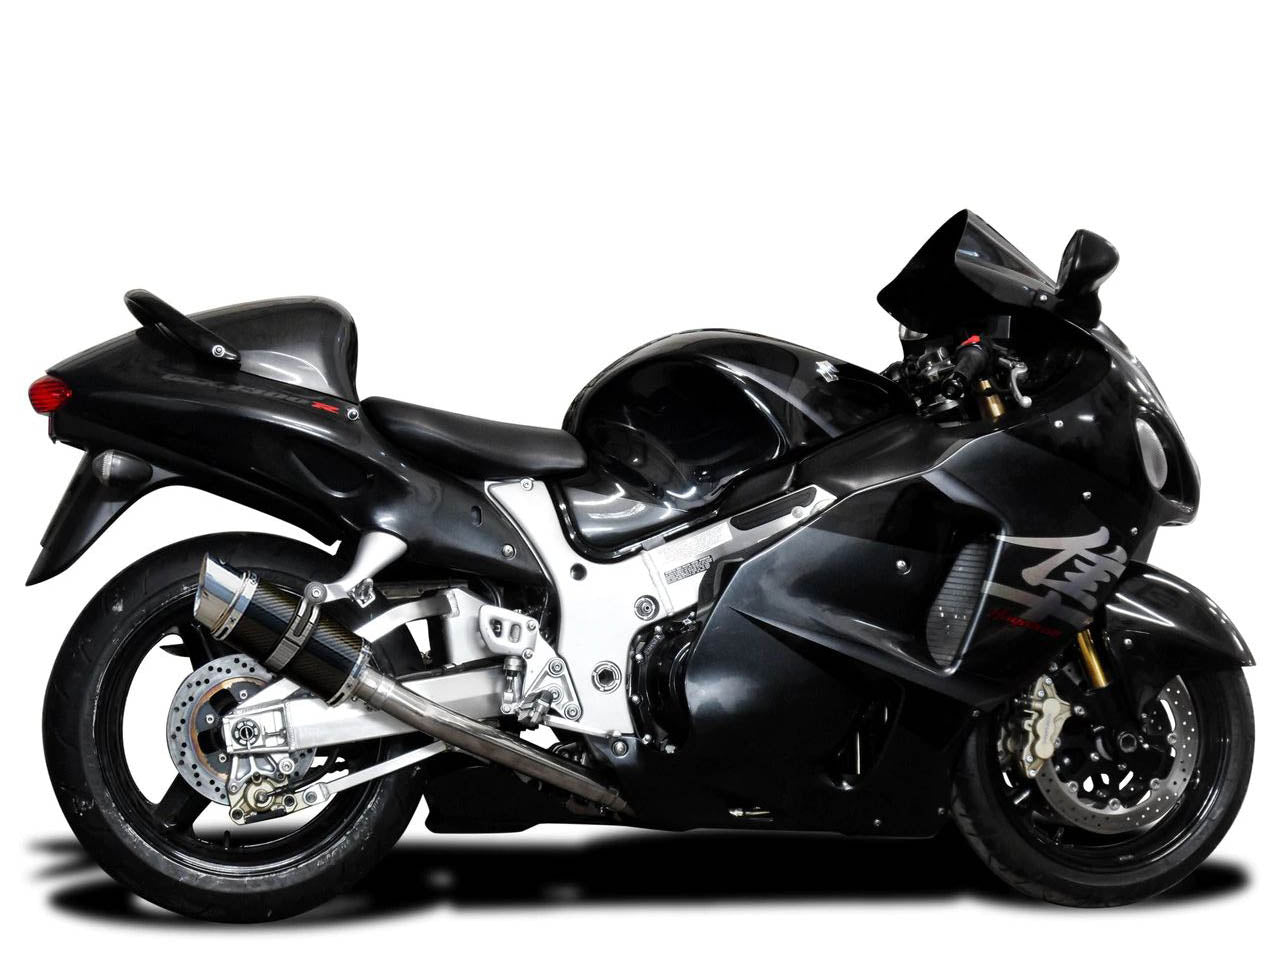 DELKEVIC Suzuki GSXR1300 Hayabusa (99/07) Full 4-1 Exhaust System with Mini 8" Carbon Silencer